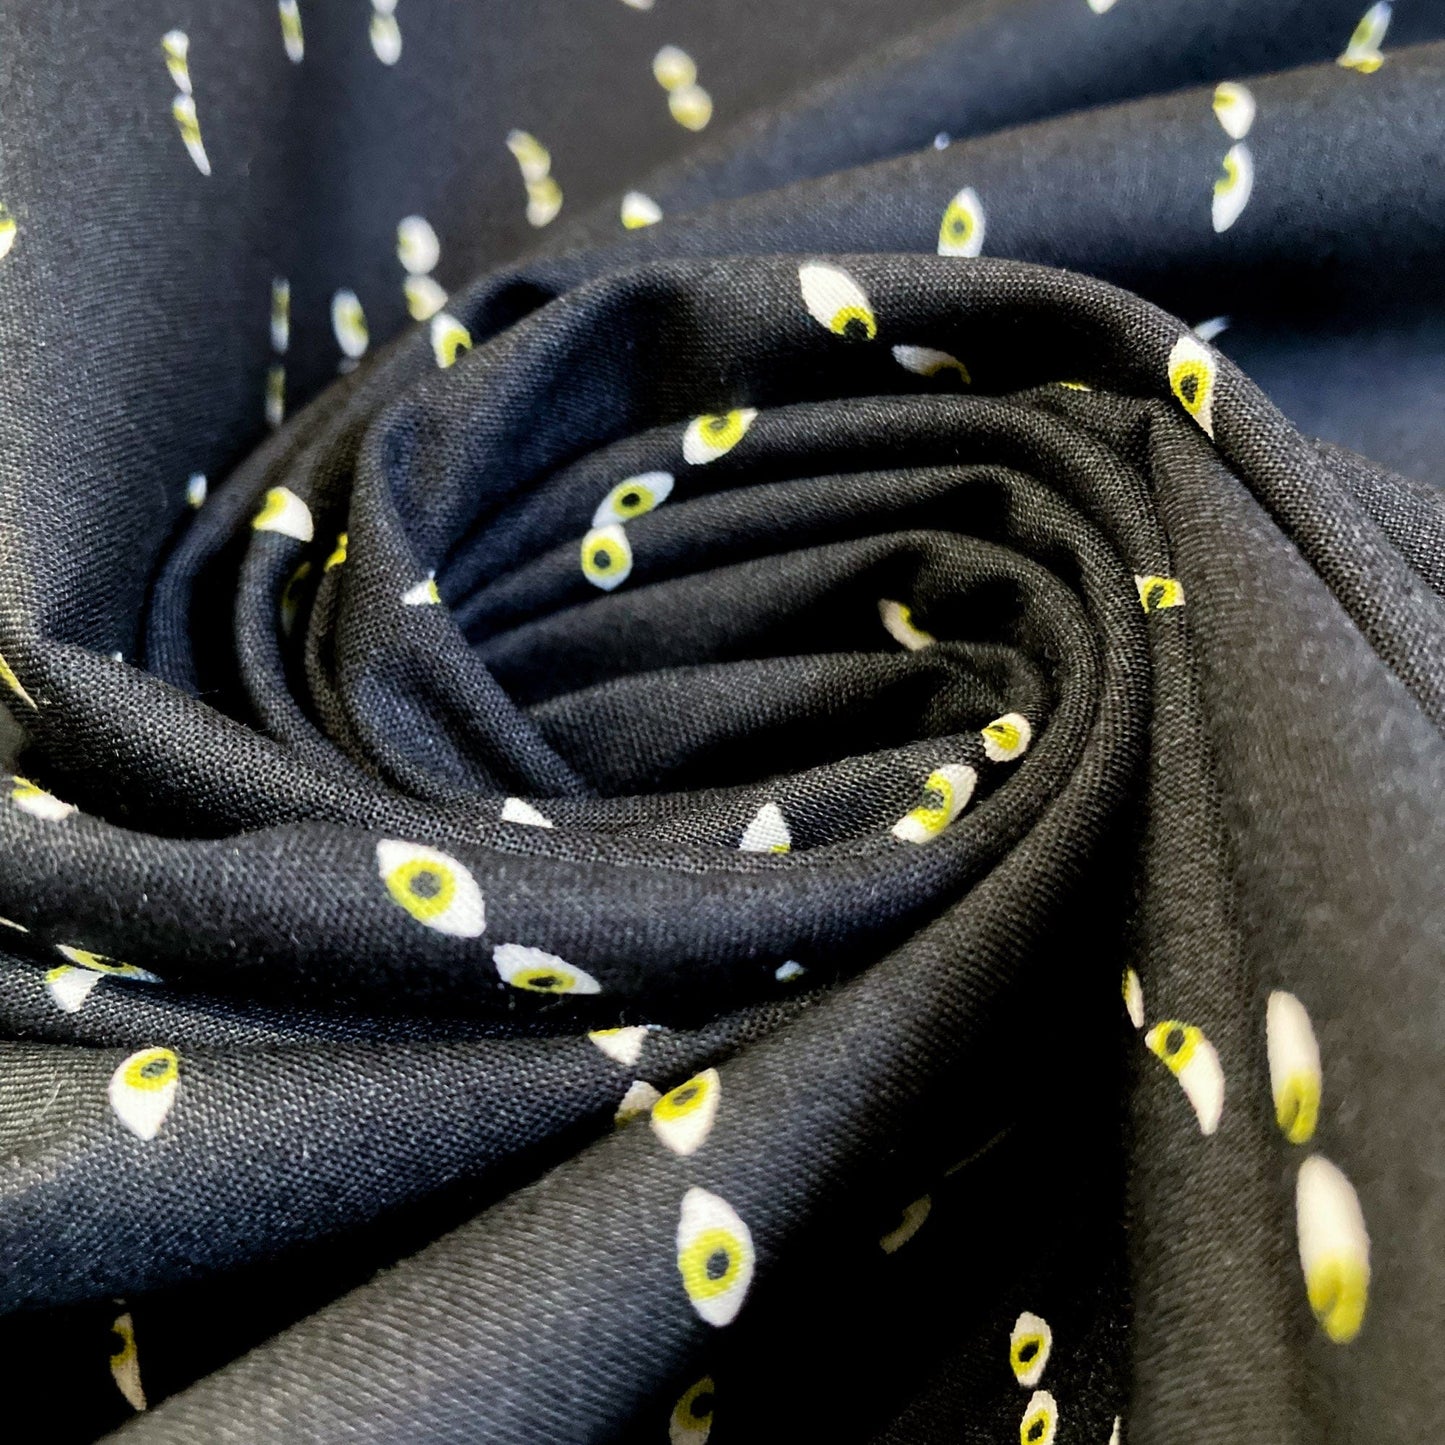 Ruby Star Society 'Tiny Frights' Quilting Cotton 'Creepy Eyes' in Black - Glows in the Dark!